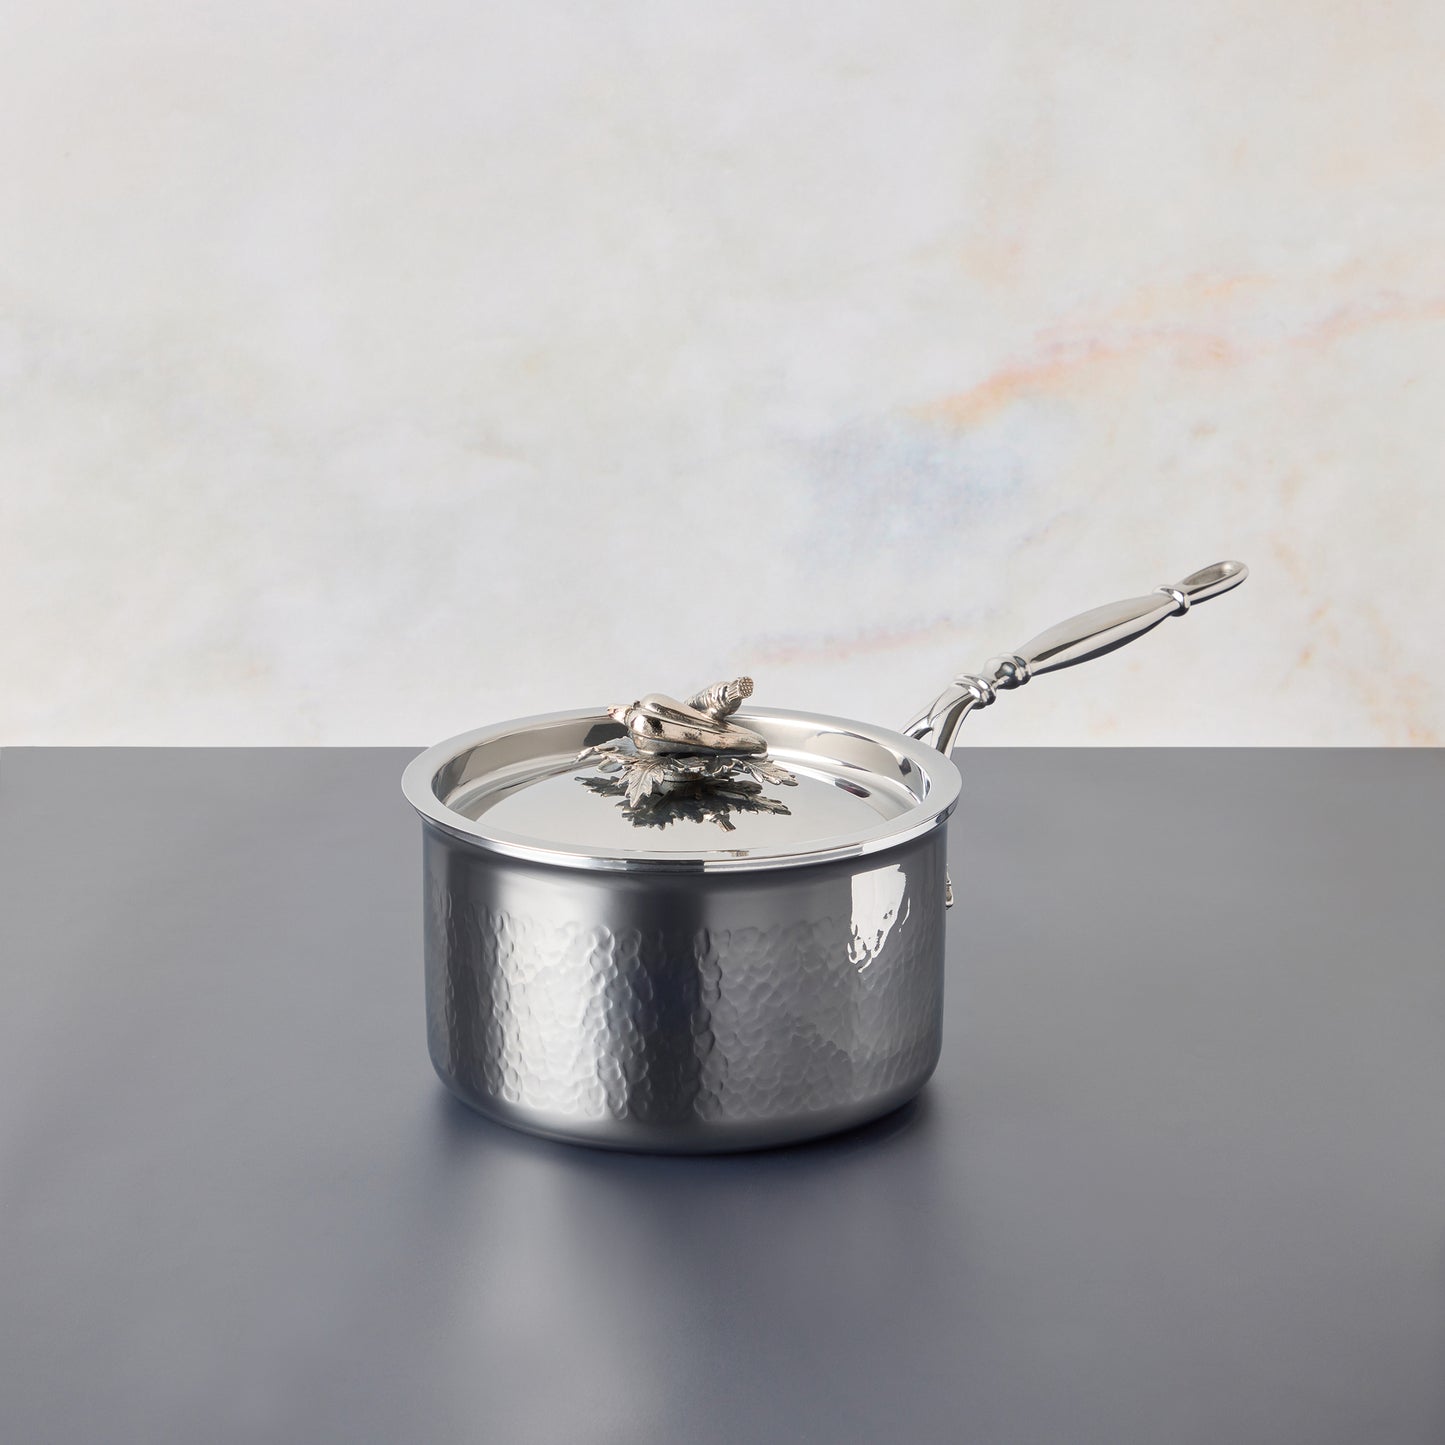 Opus Prima hammered clad stainless steel saucepan with decorated silver-plated lid knob finial from Ruffoni